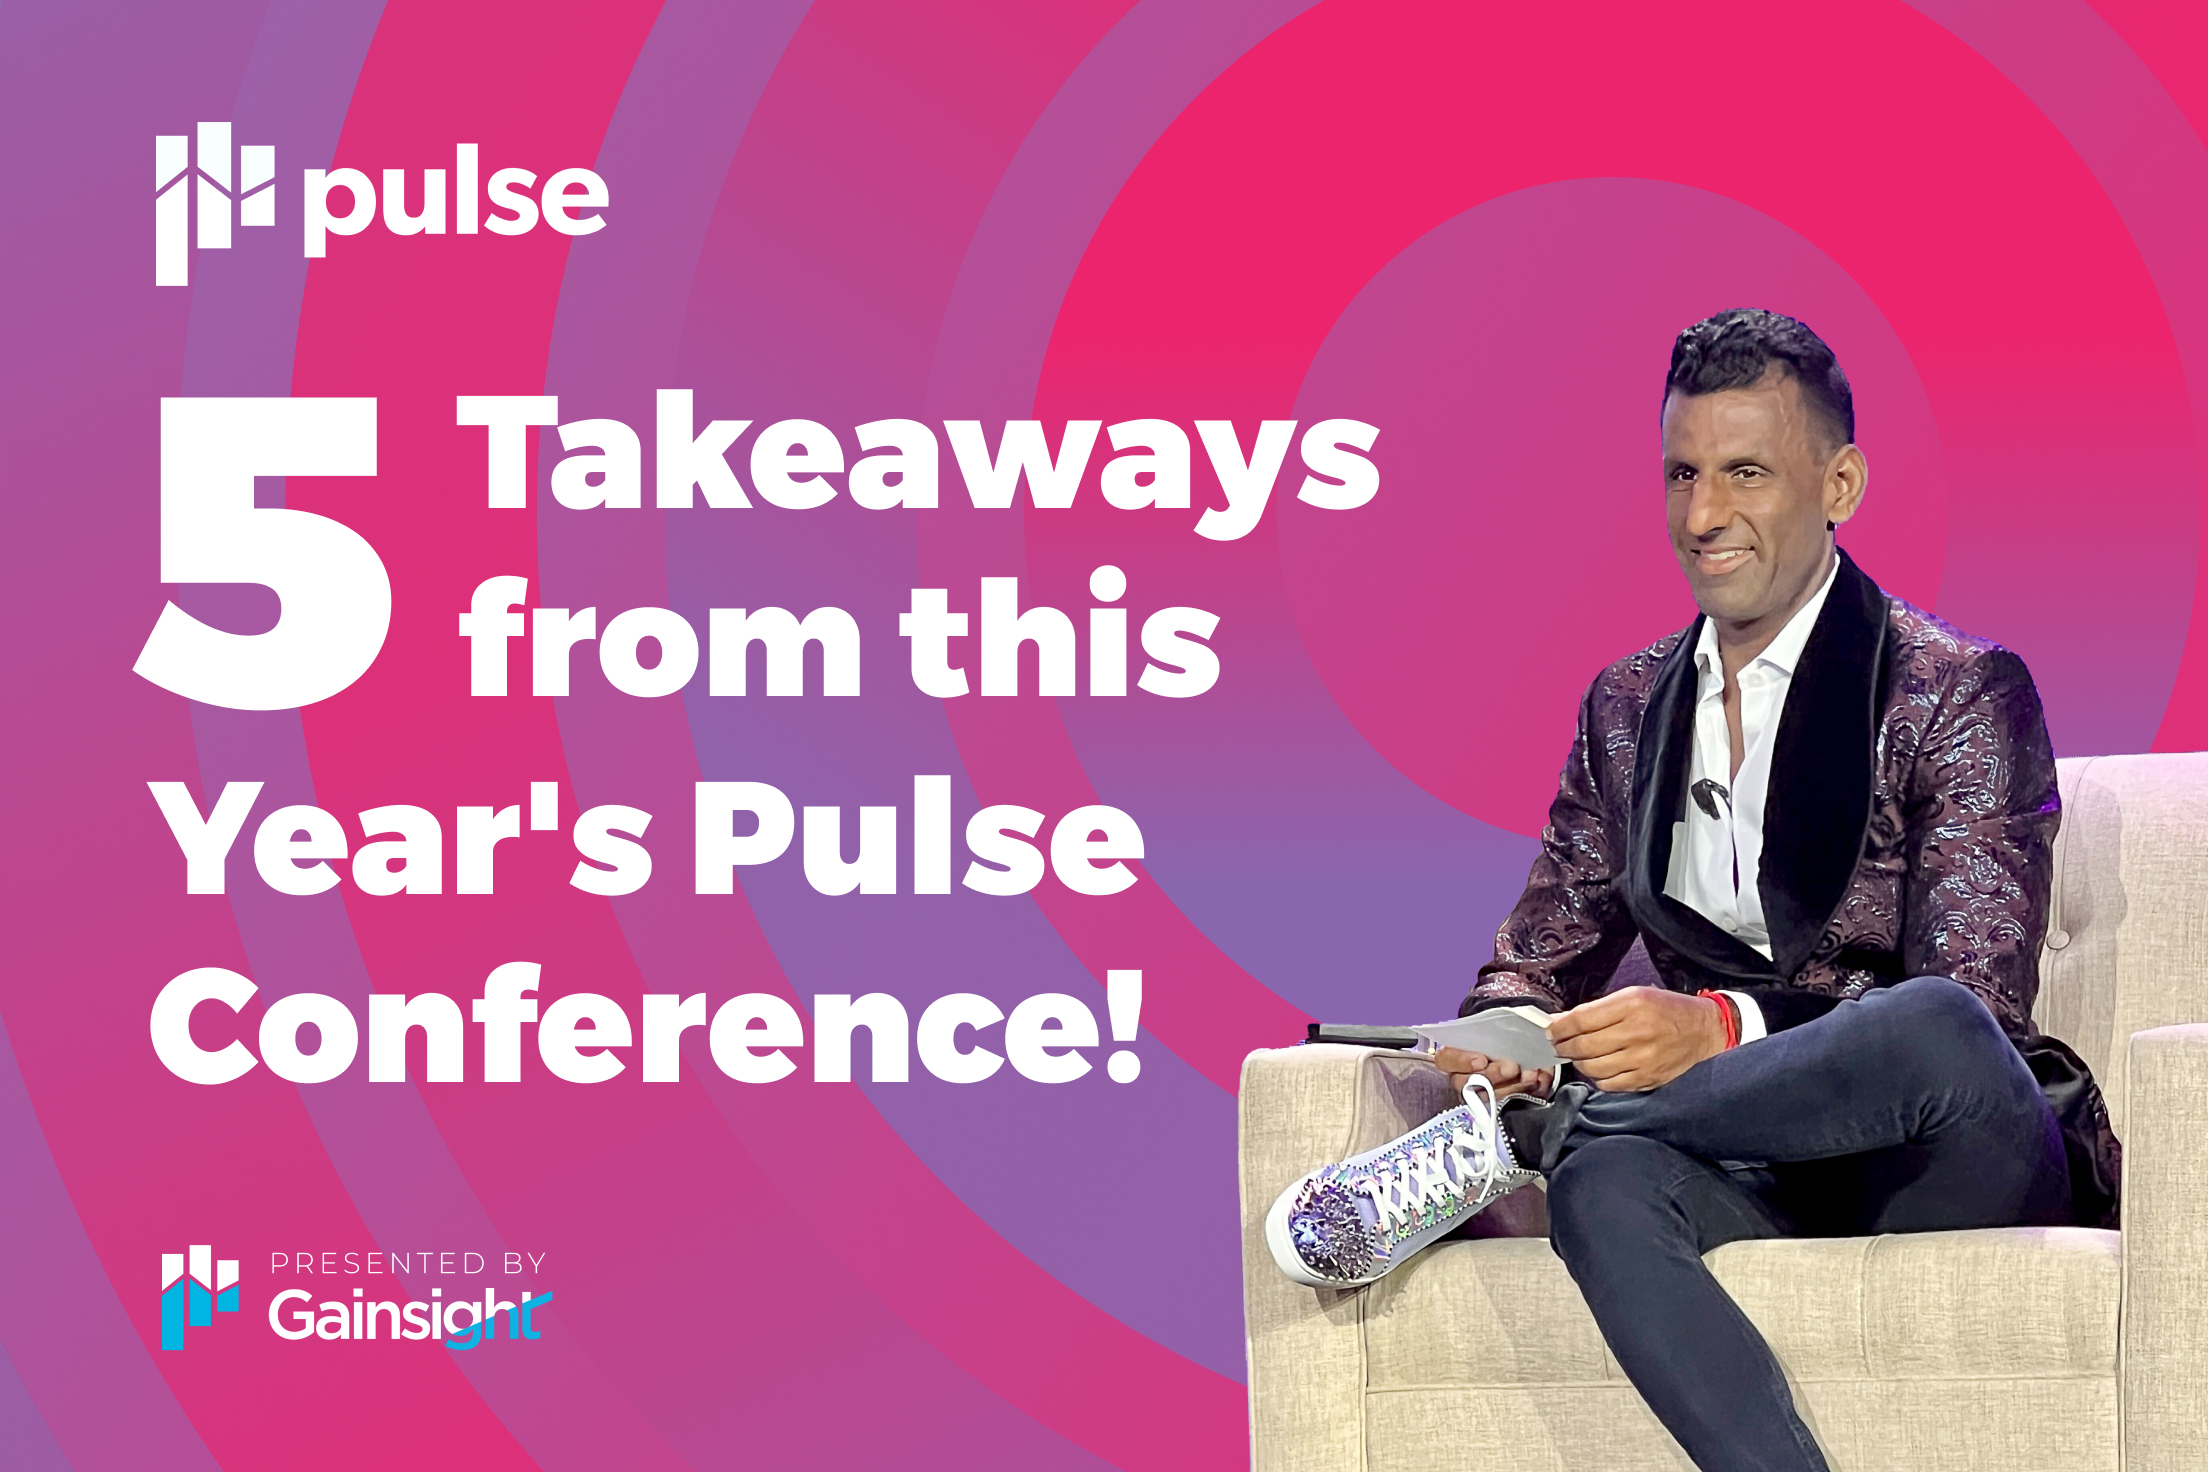 5 Takeaways from this Year’s Pulse Conference Image